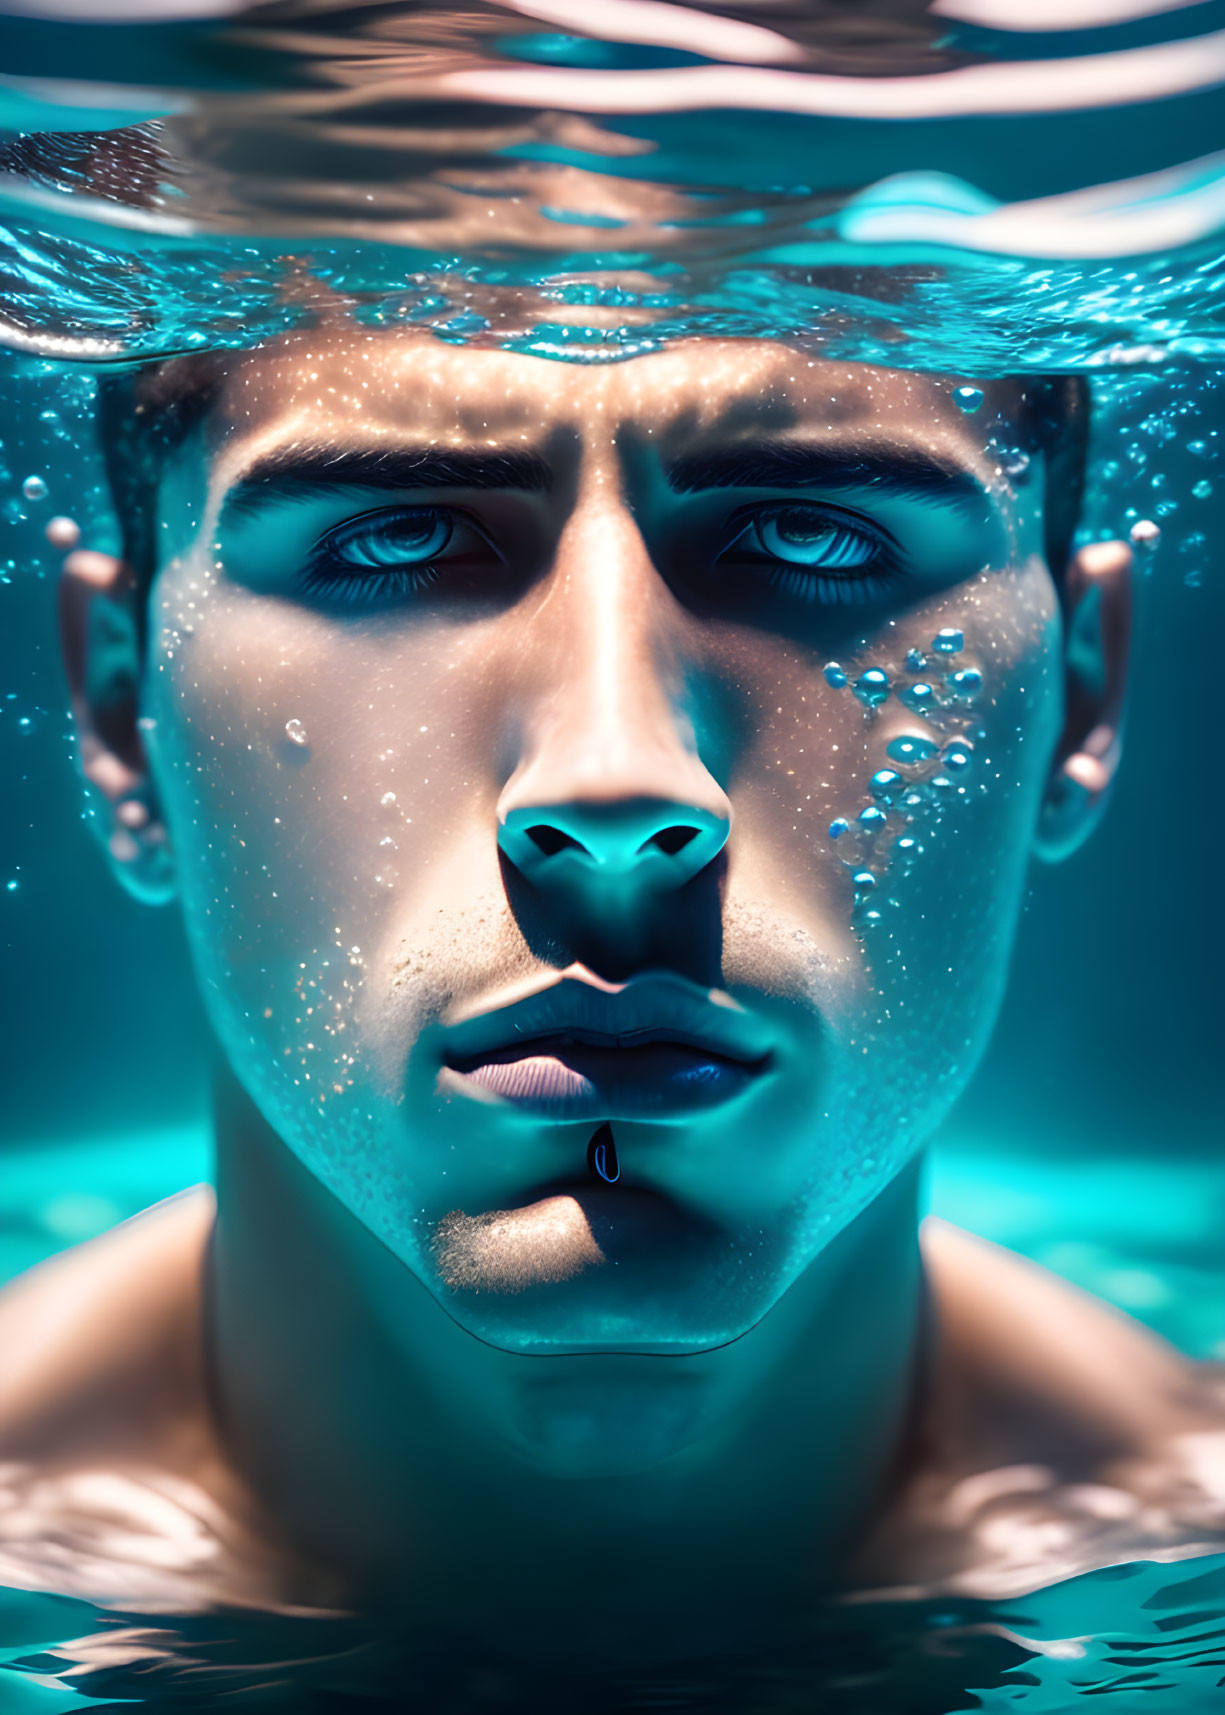 Person submerged in water with air bubbles, gazing at viewer.